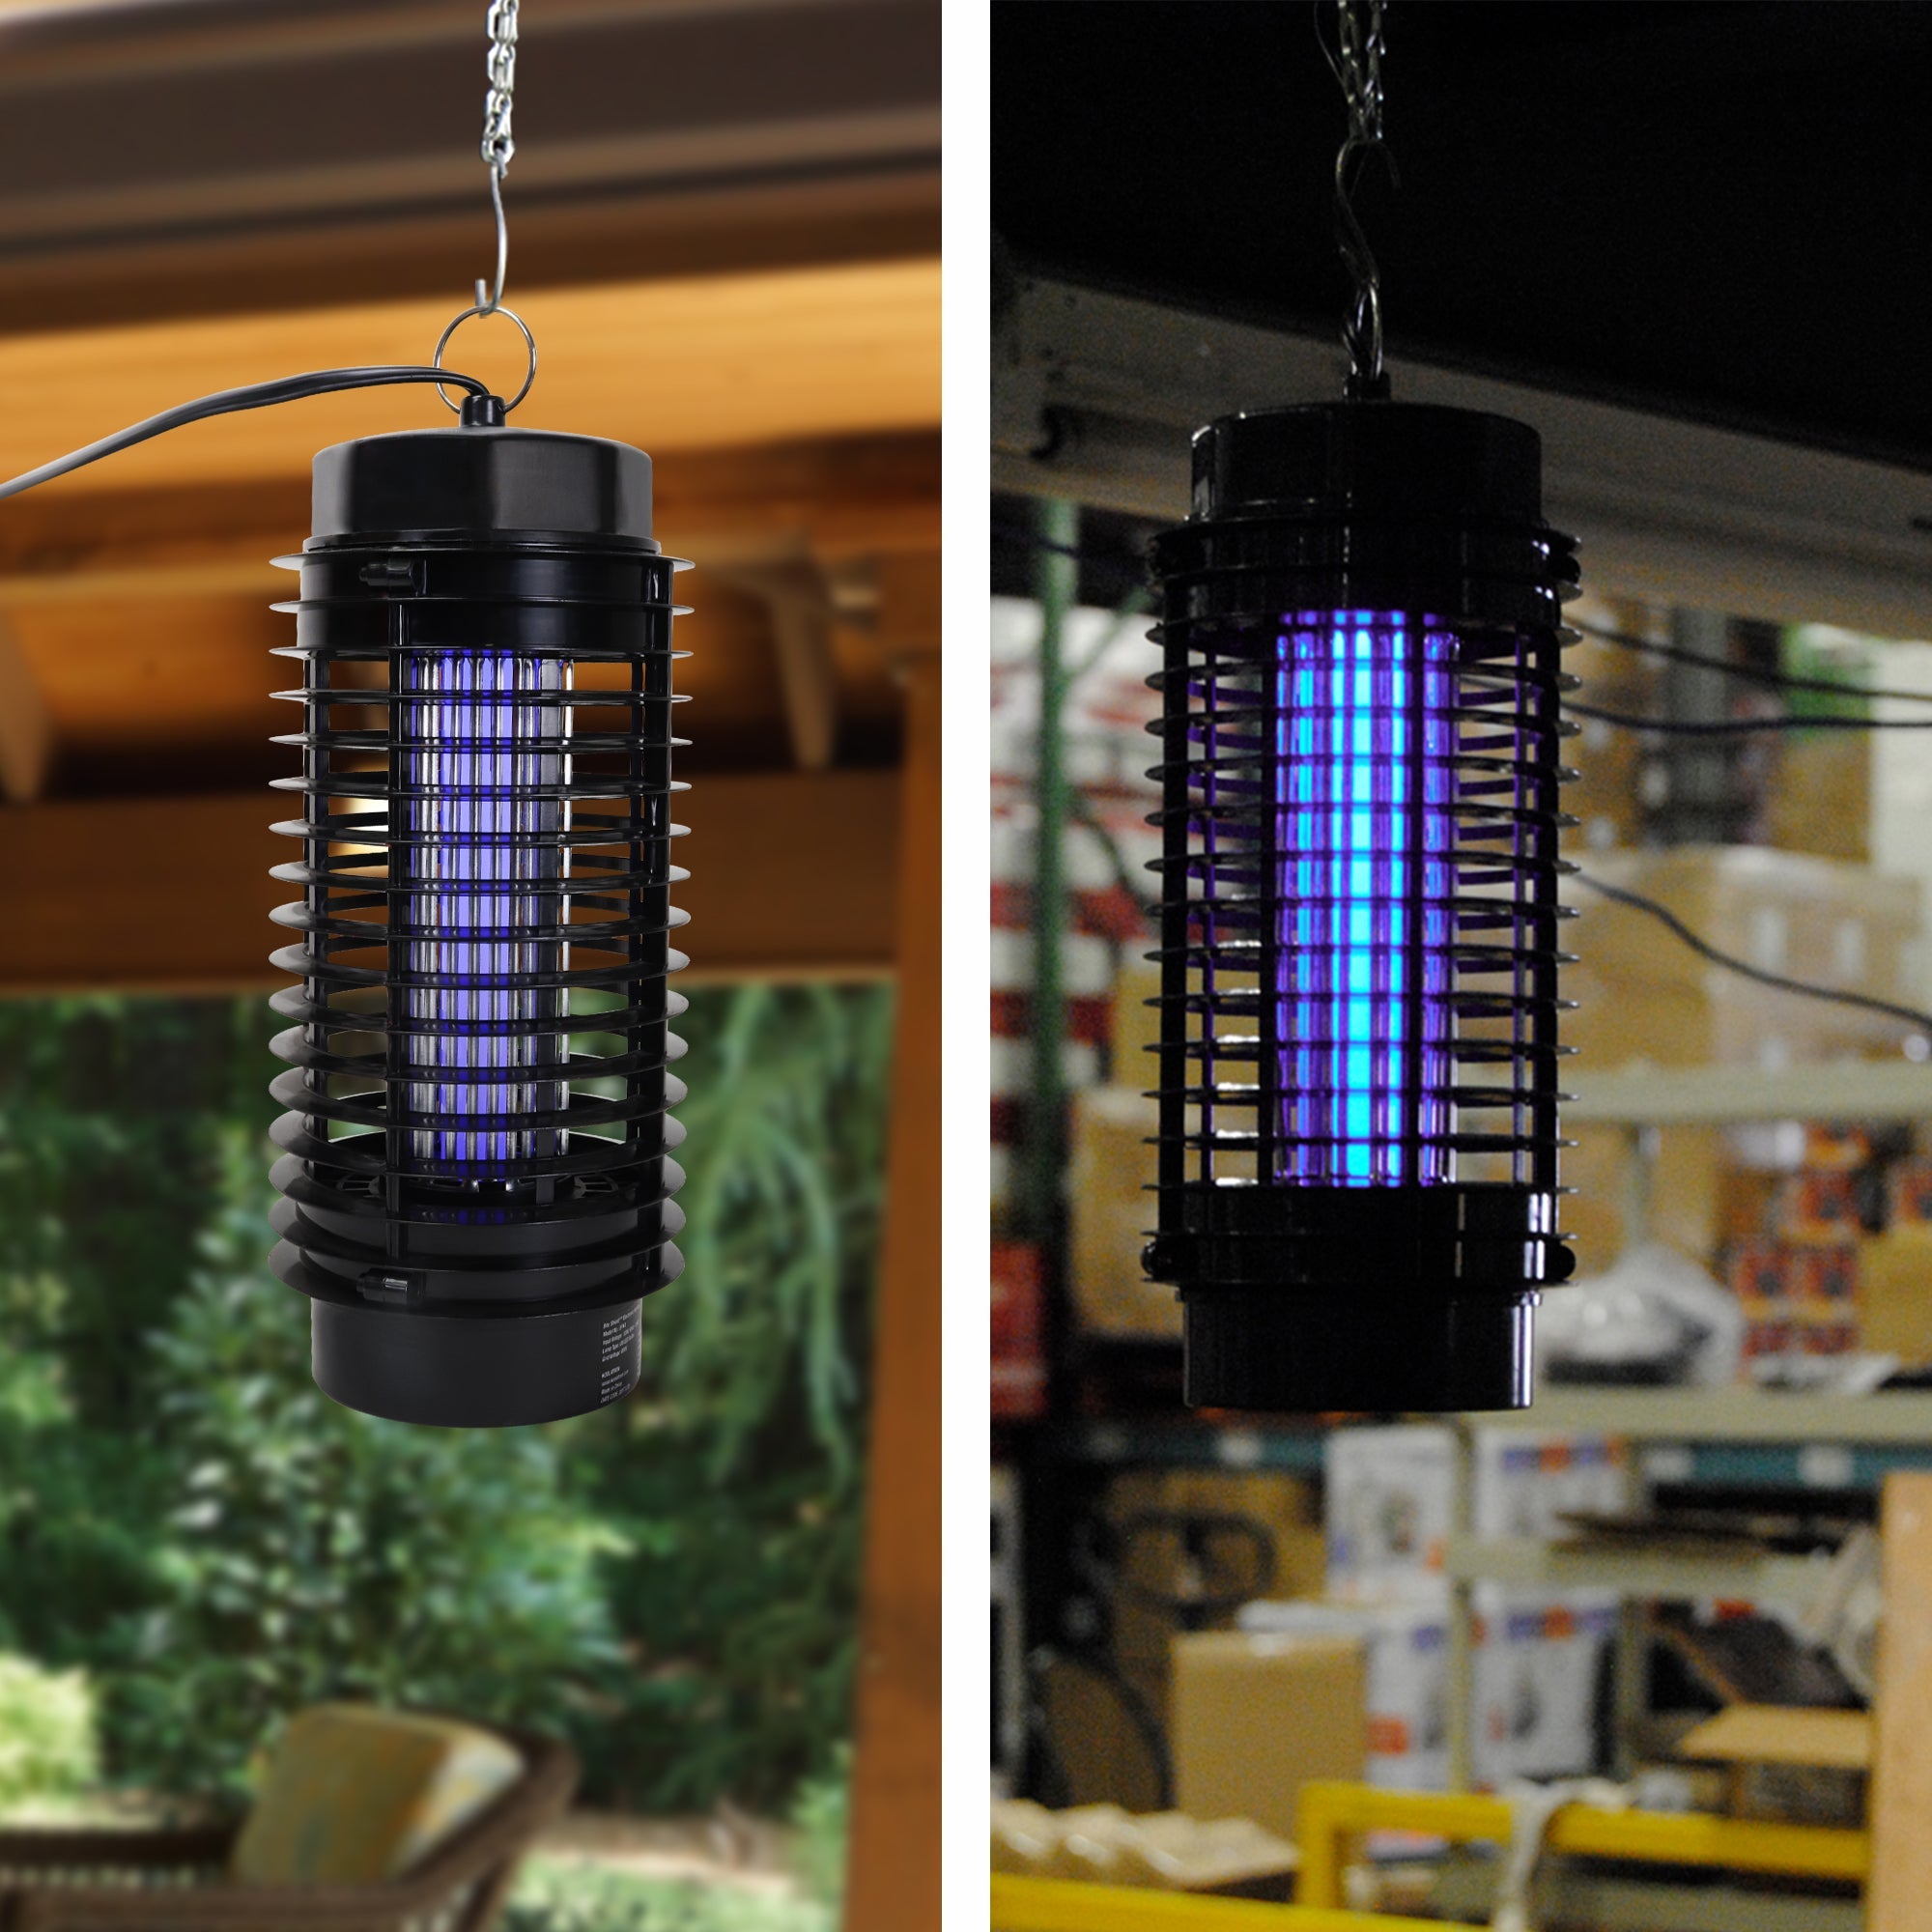 On the right is a lifestyle image of the Bite Shield electronic flying insect zapper hanging from a wooden ceiling indoors with a window and green space visible in the background. On the left is a lifestyle image of the Bite Shield electronic flying insect zapper hanging outdoors with an open garage door in the background